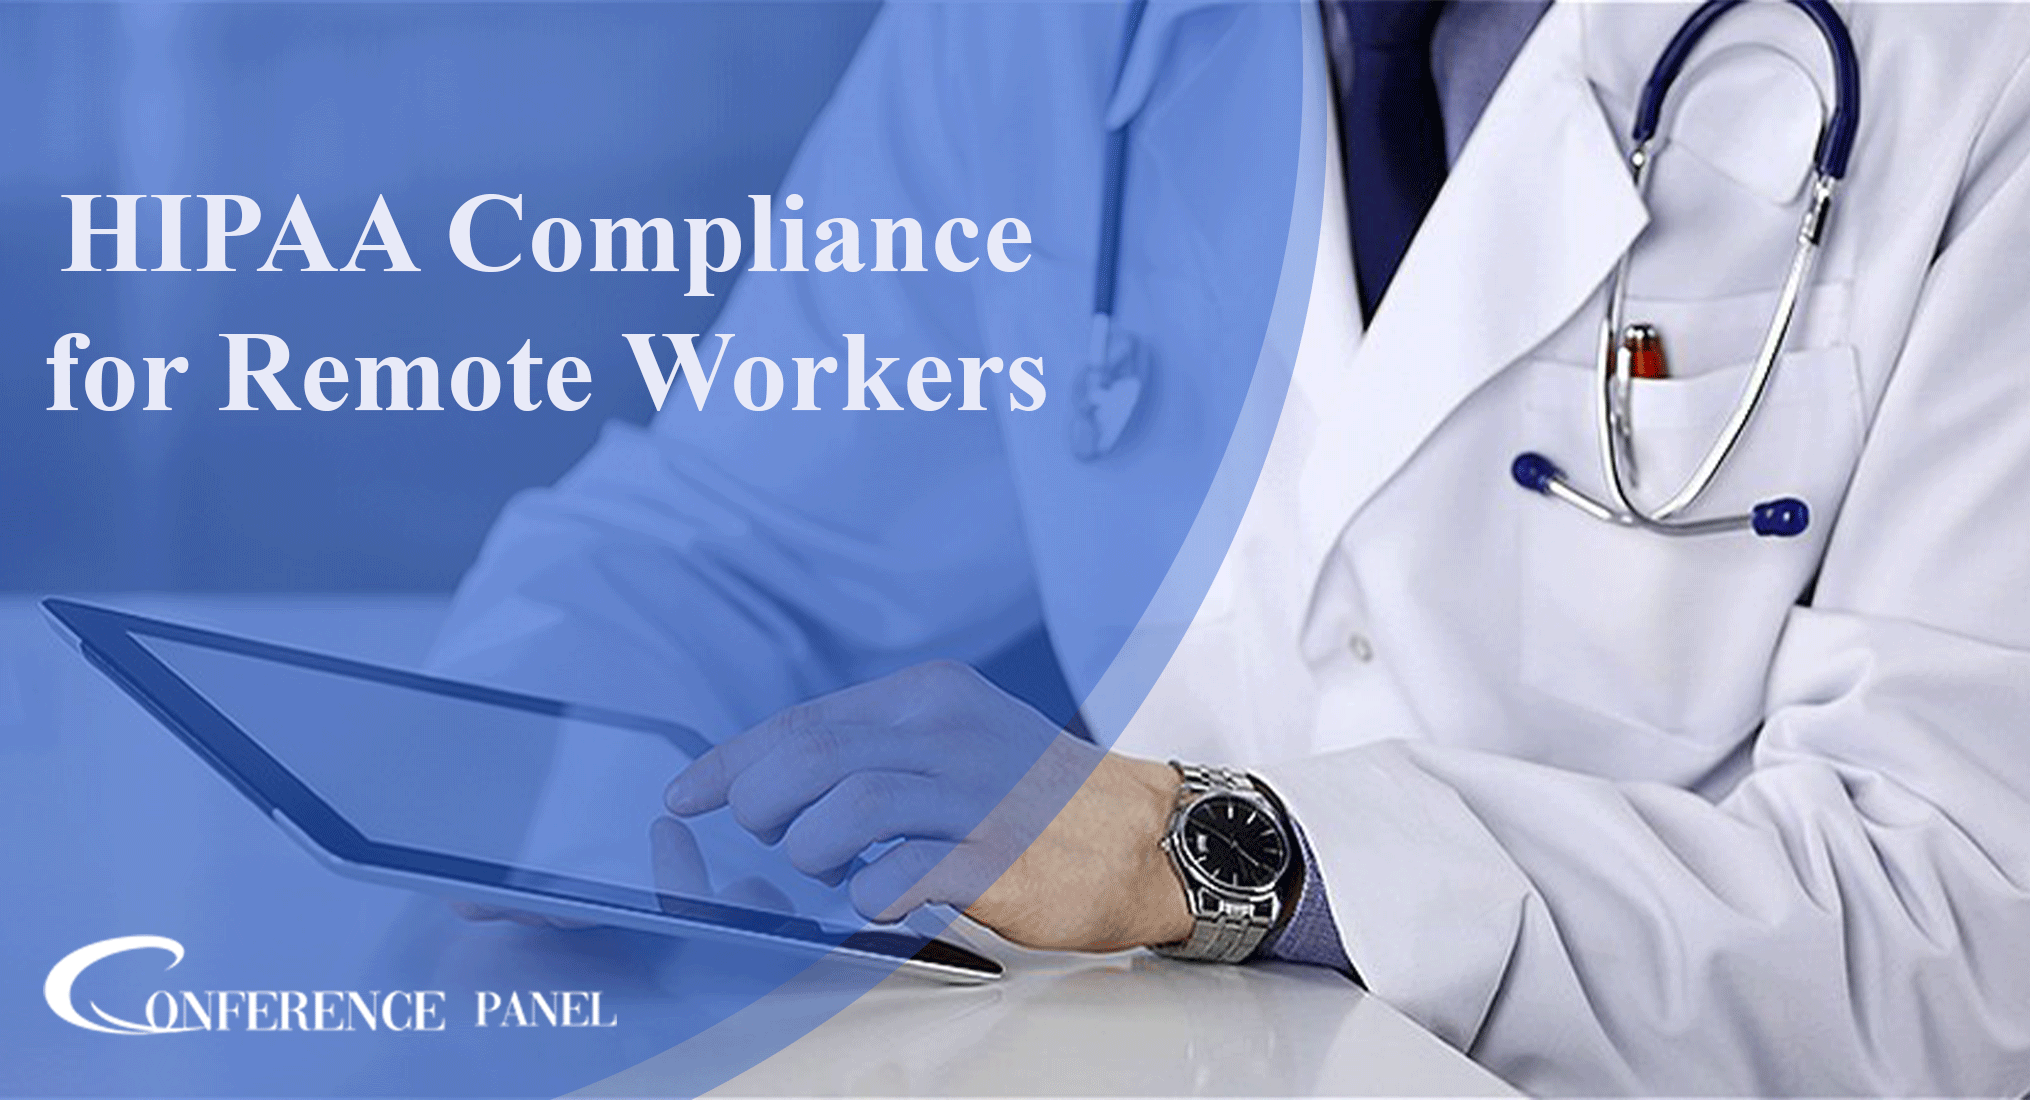 HIPAA Compliance for Remote Workers